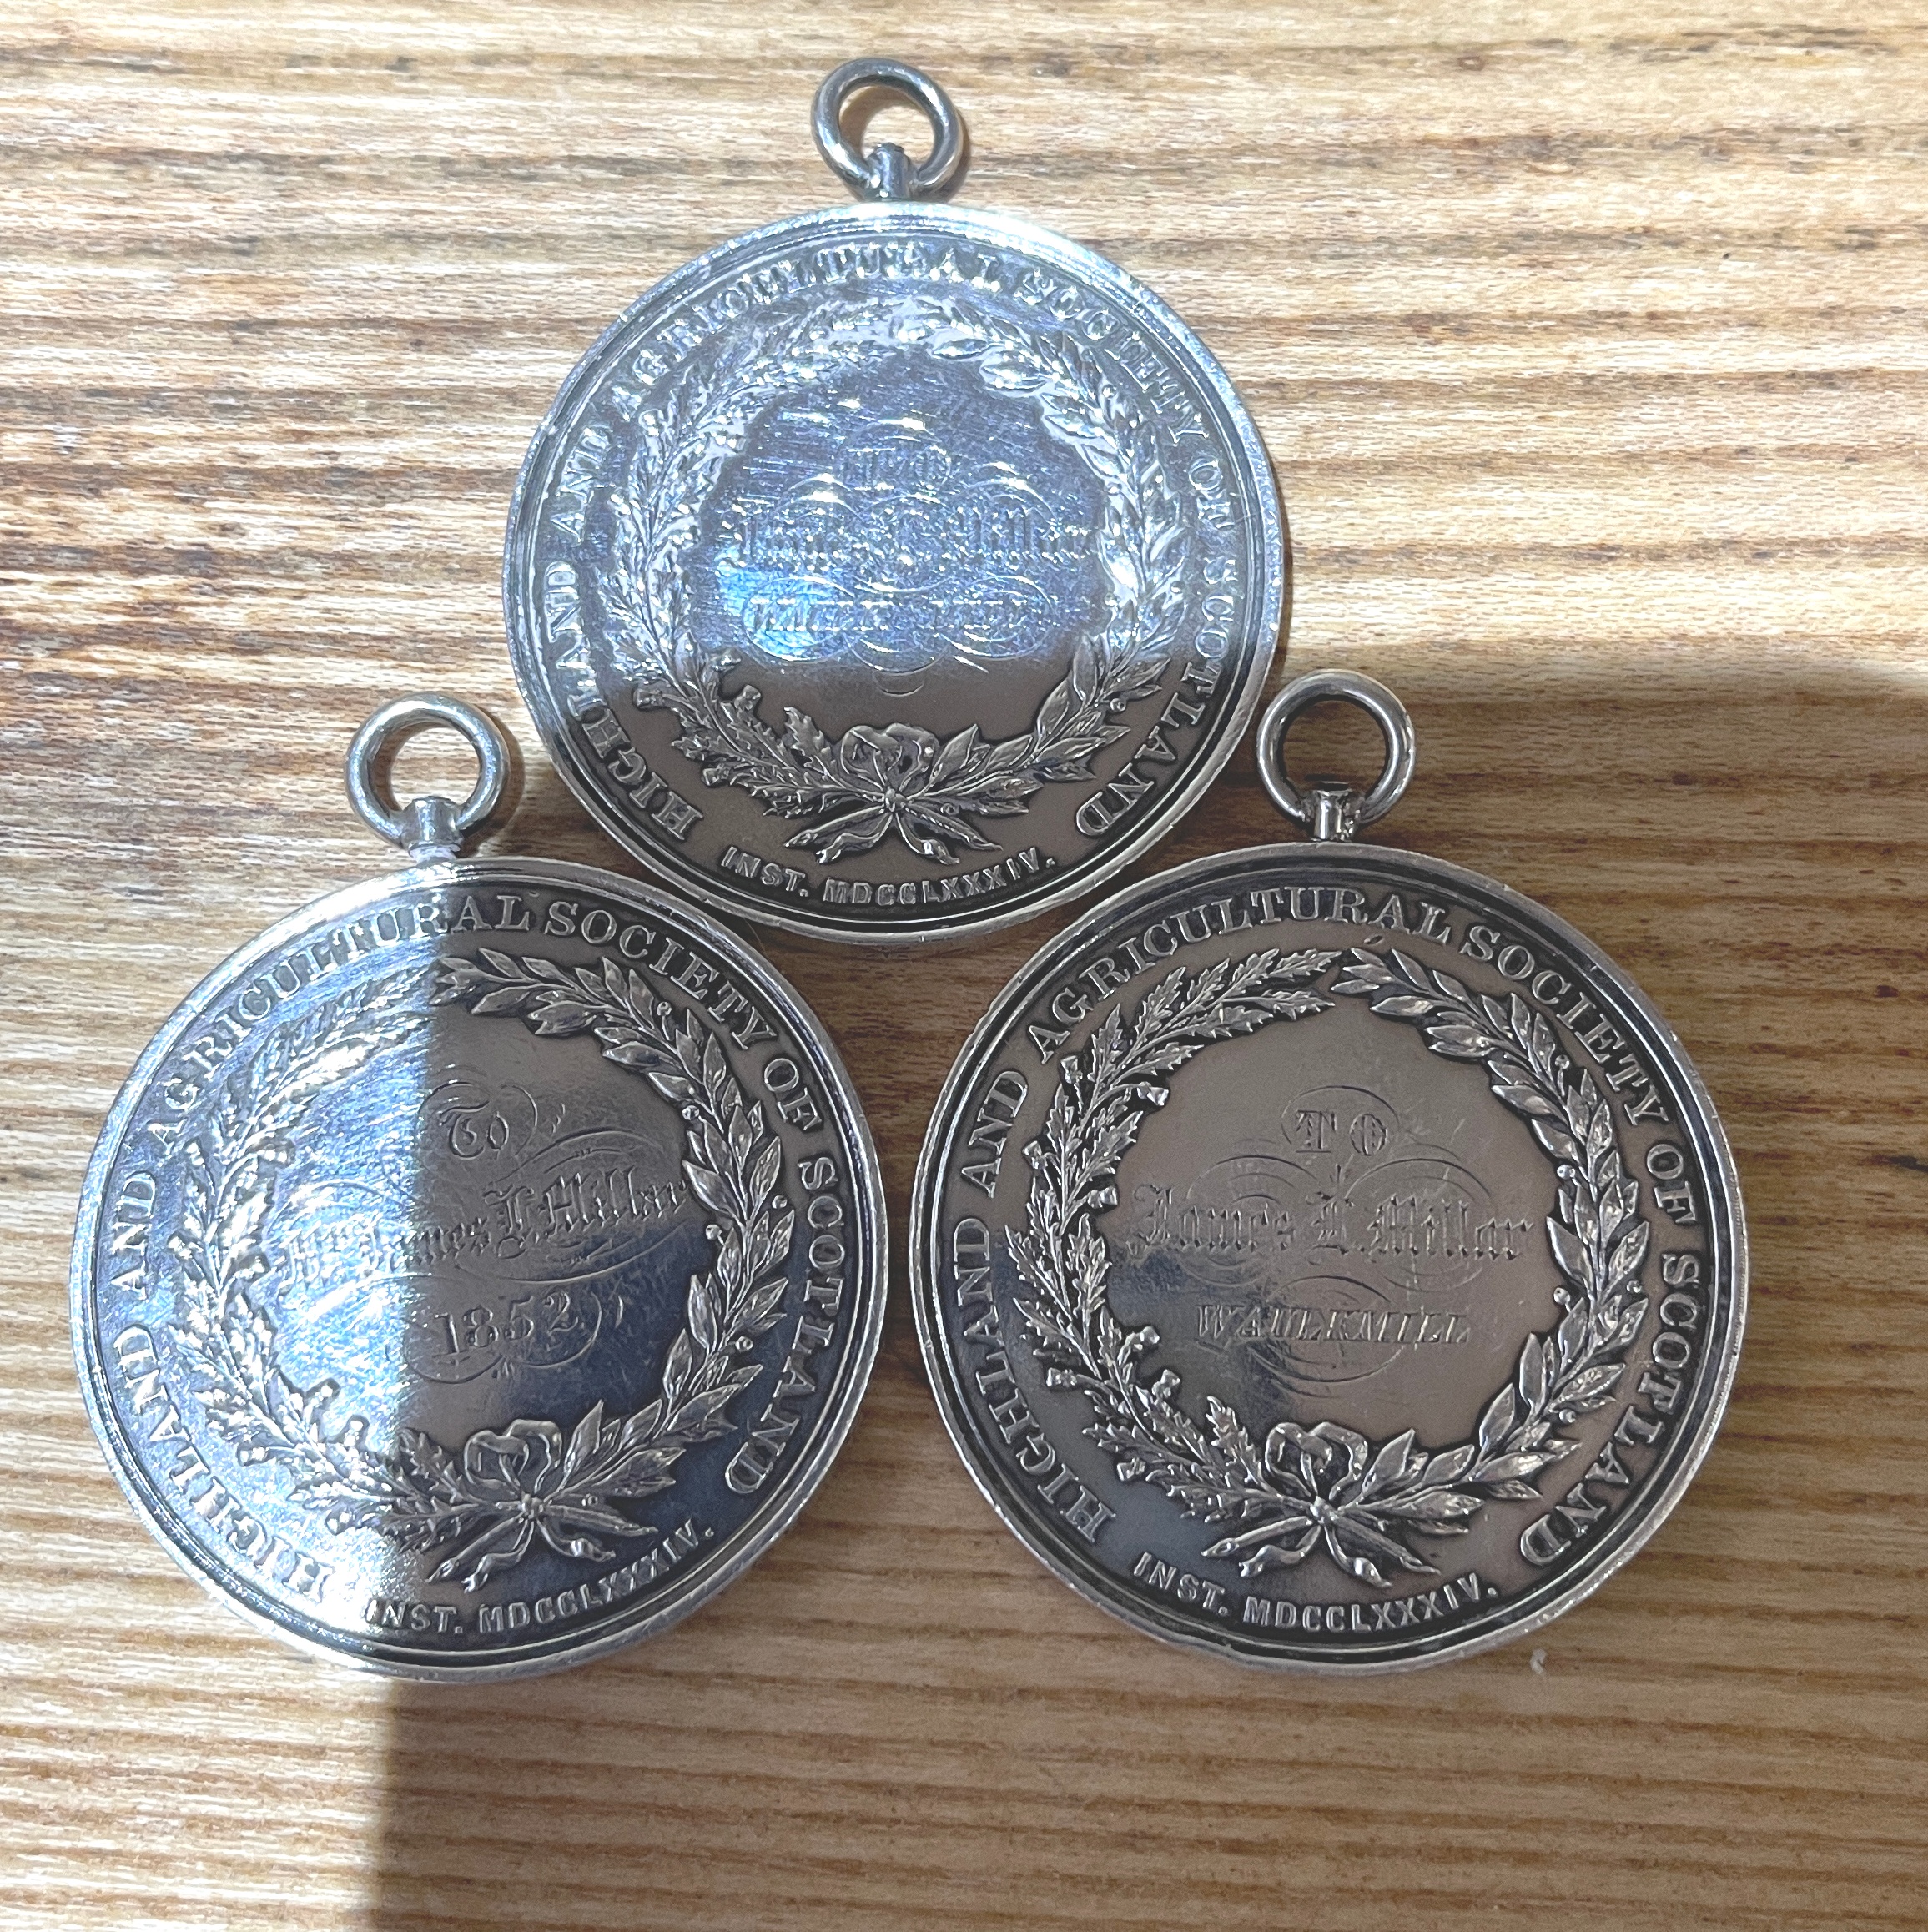 Lot of 3 Victorian Highland and Scottish Agricultural Society Medals - 44mm diameter. - Image 2 of 11